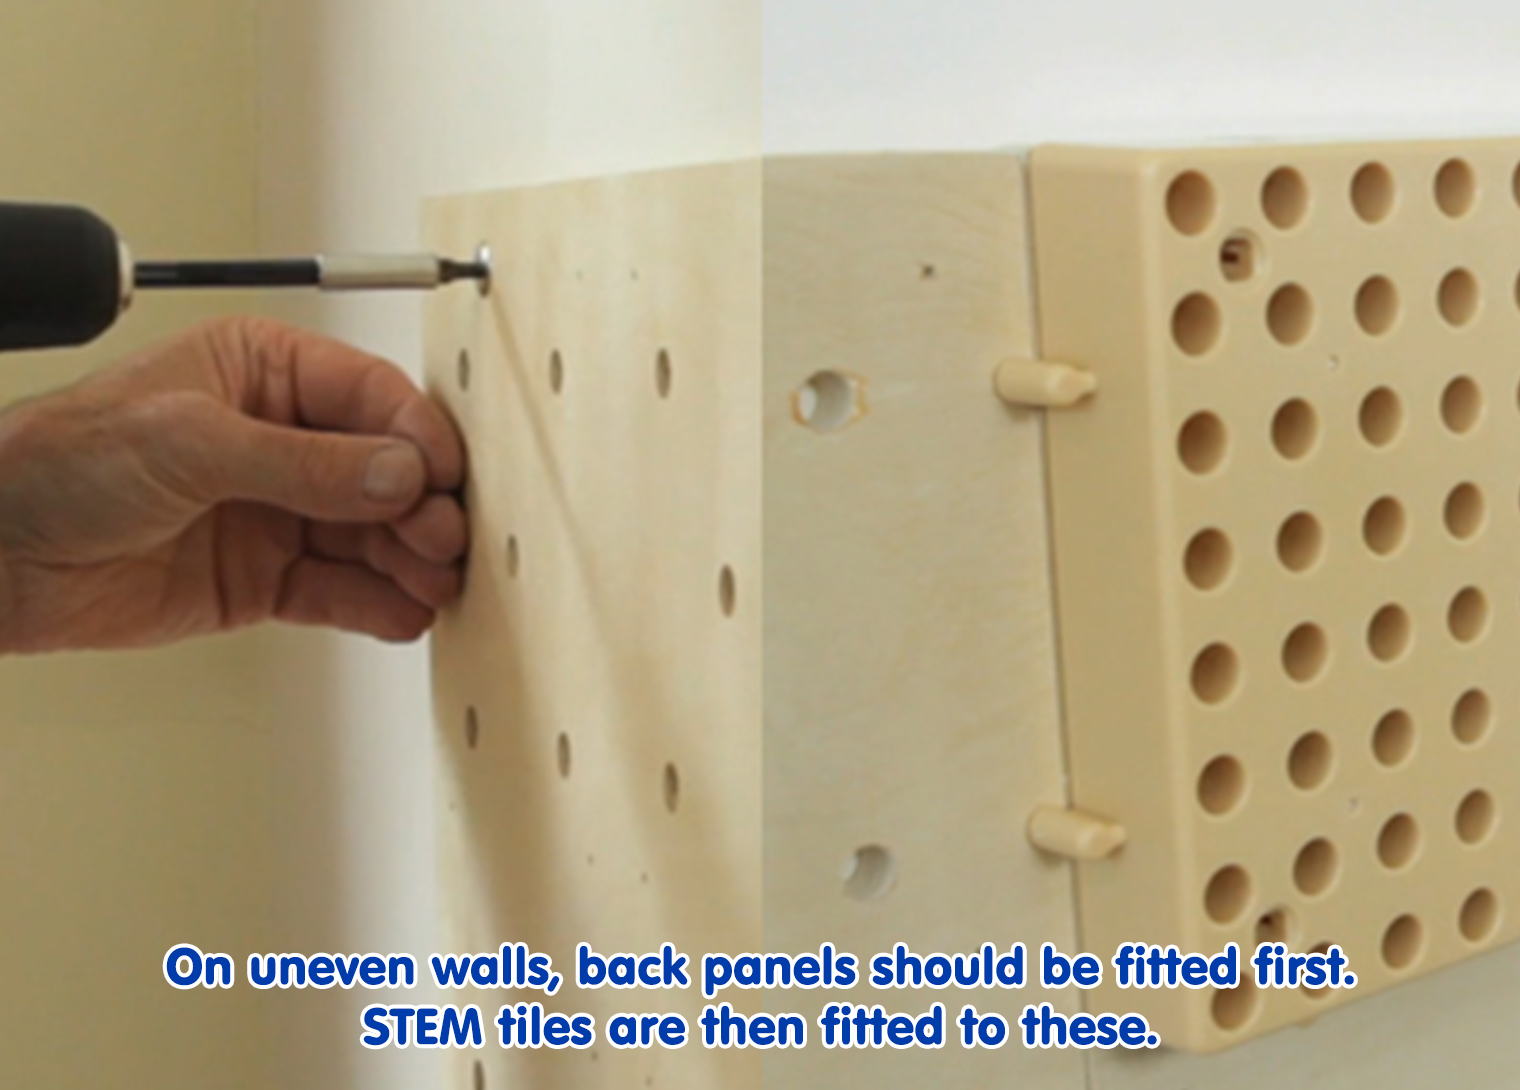 Fitting an Indoor STEM Wall WITH Back Panels